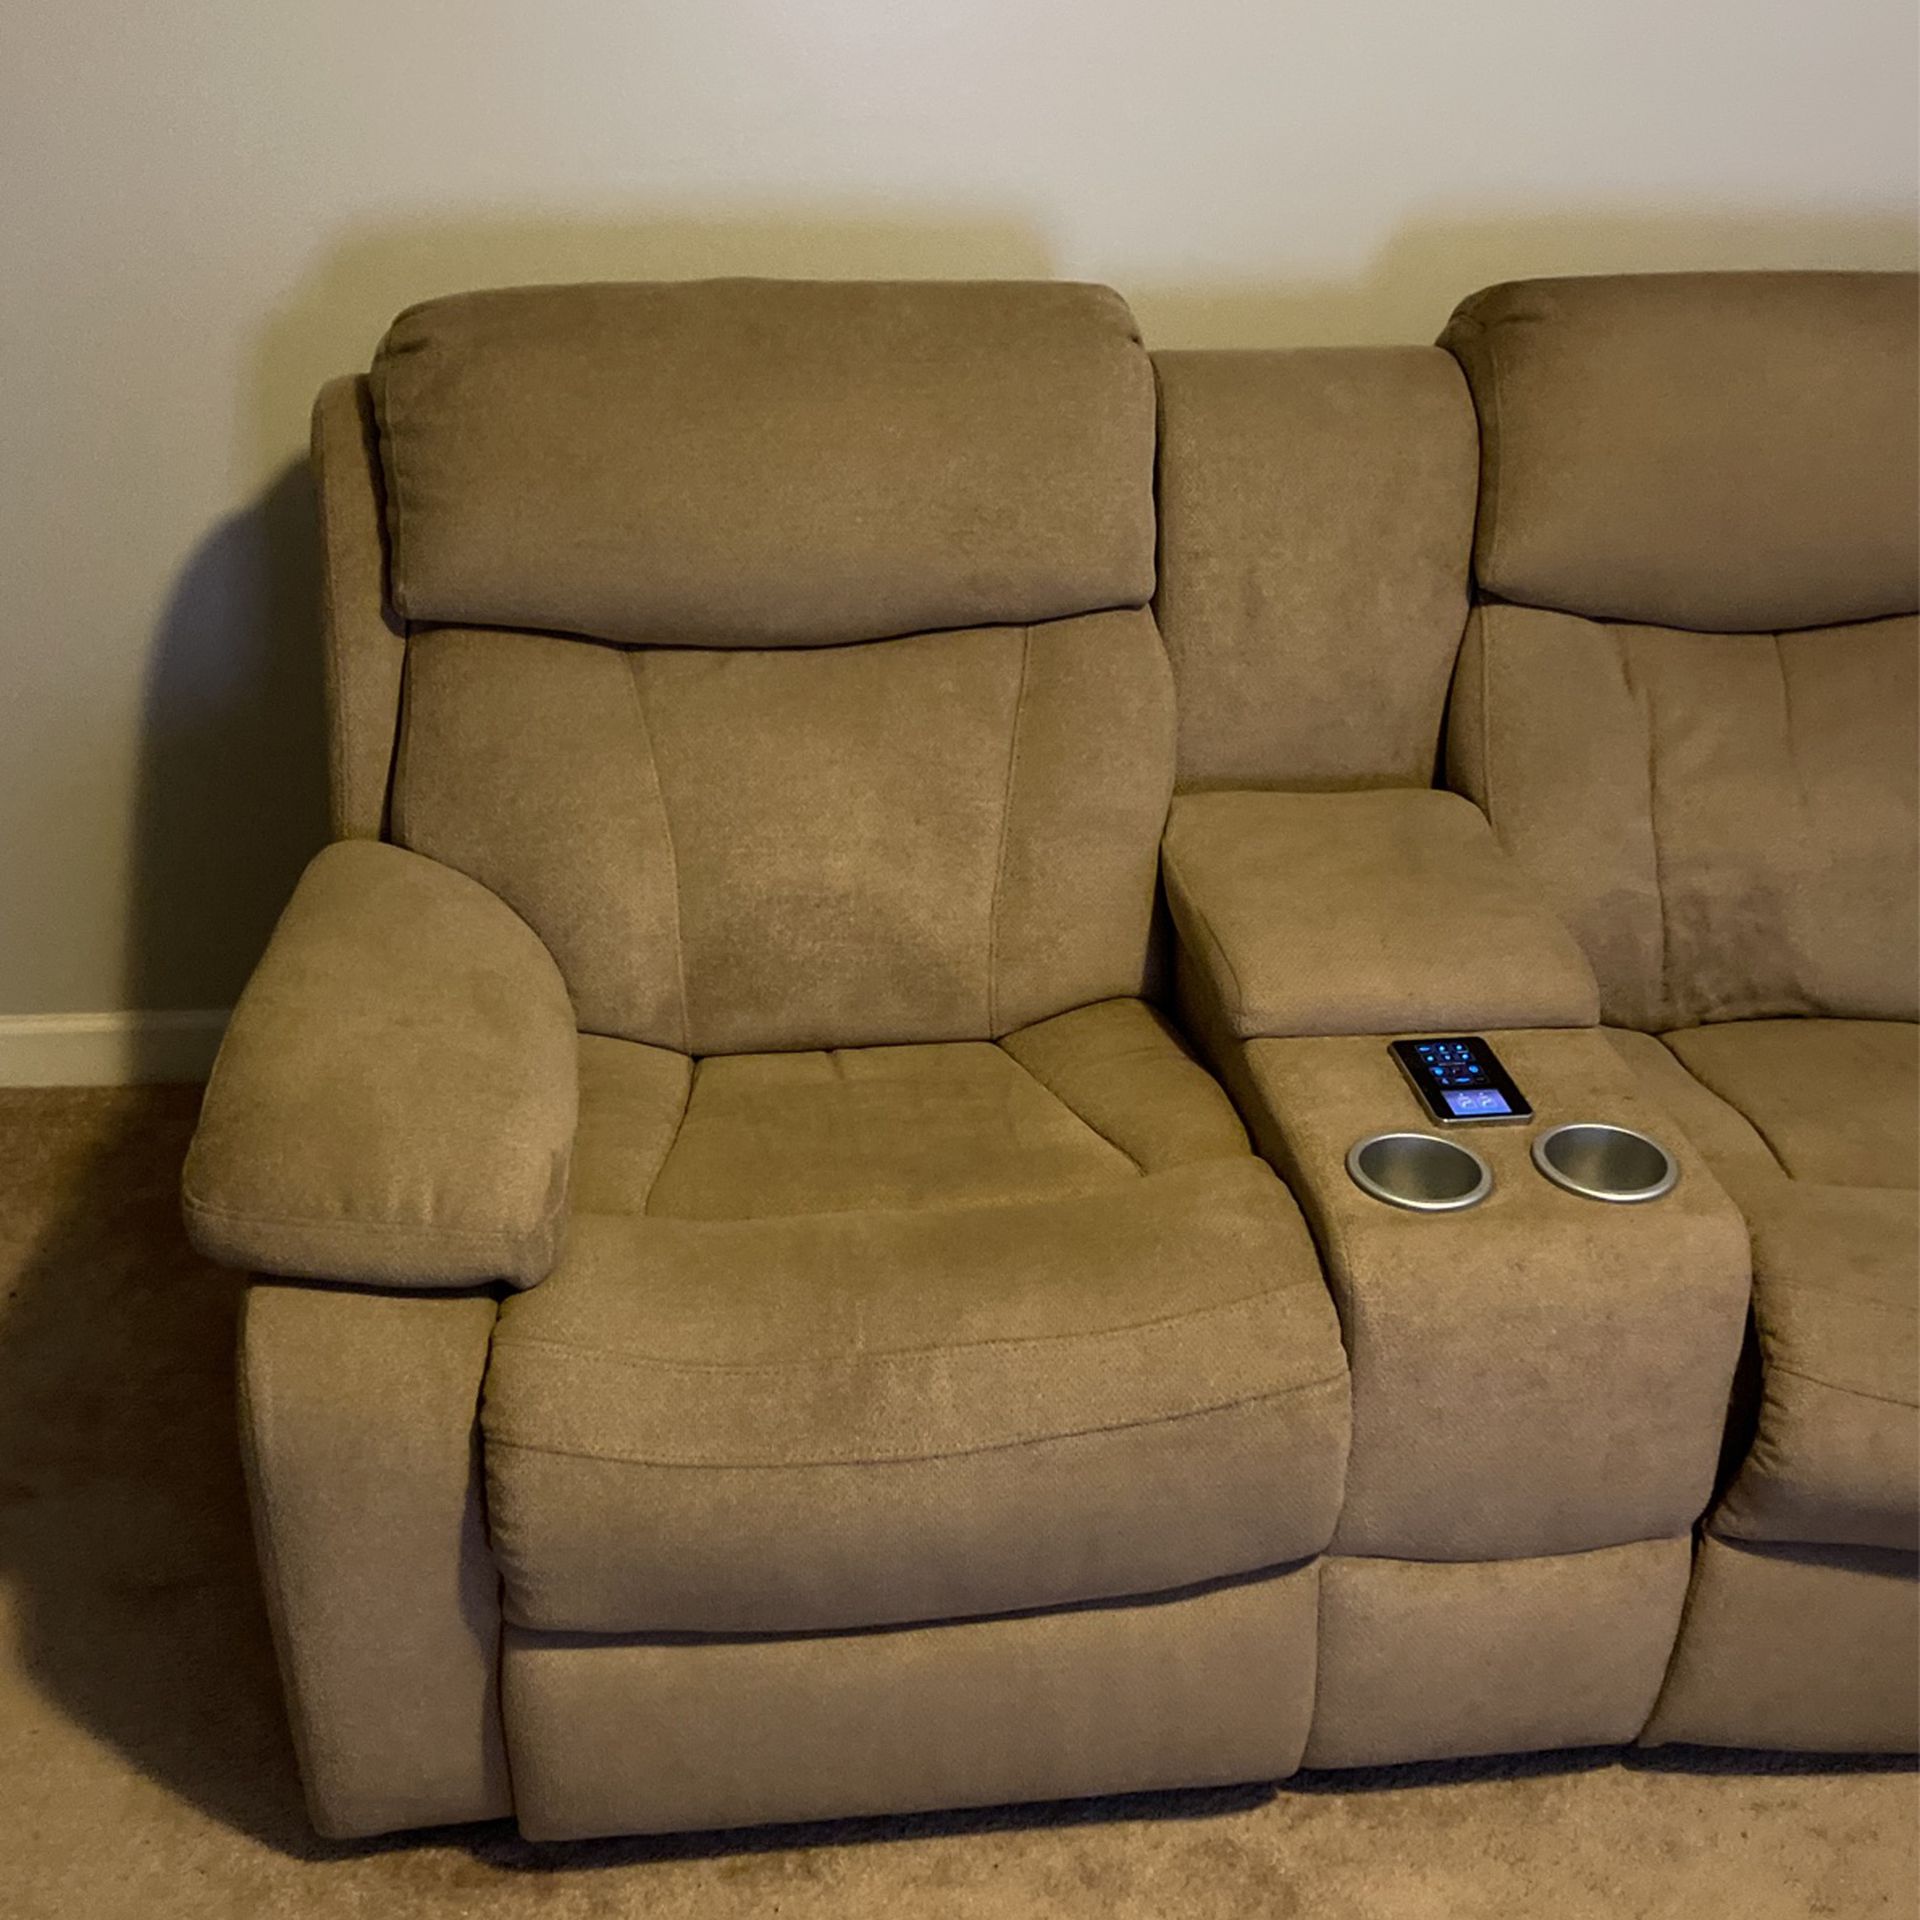 Sectional Couch w/ 3 Reclining Seats. Cup holder Cooling, heated Seats, And Massage Features .